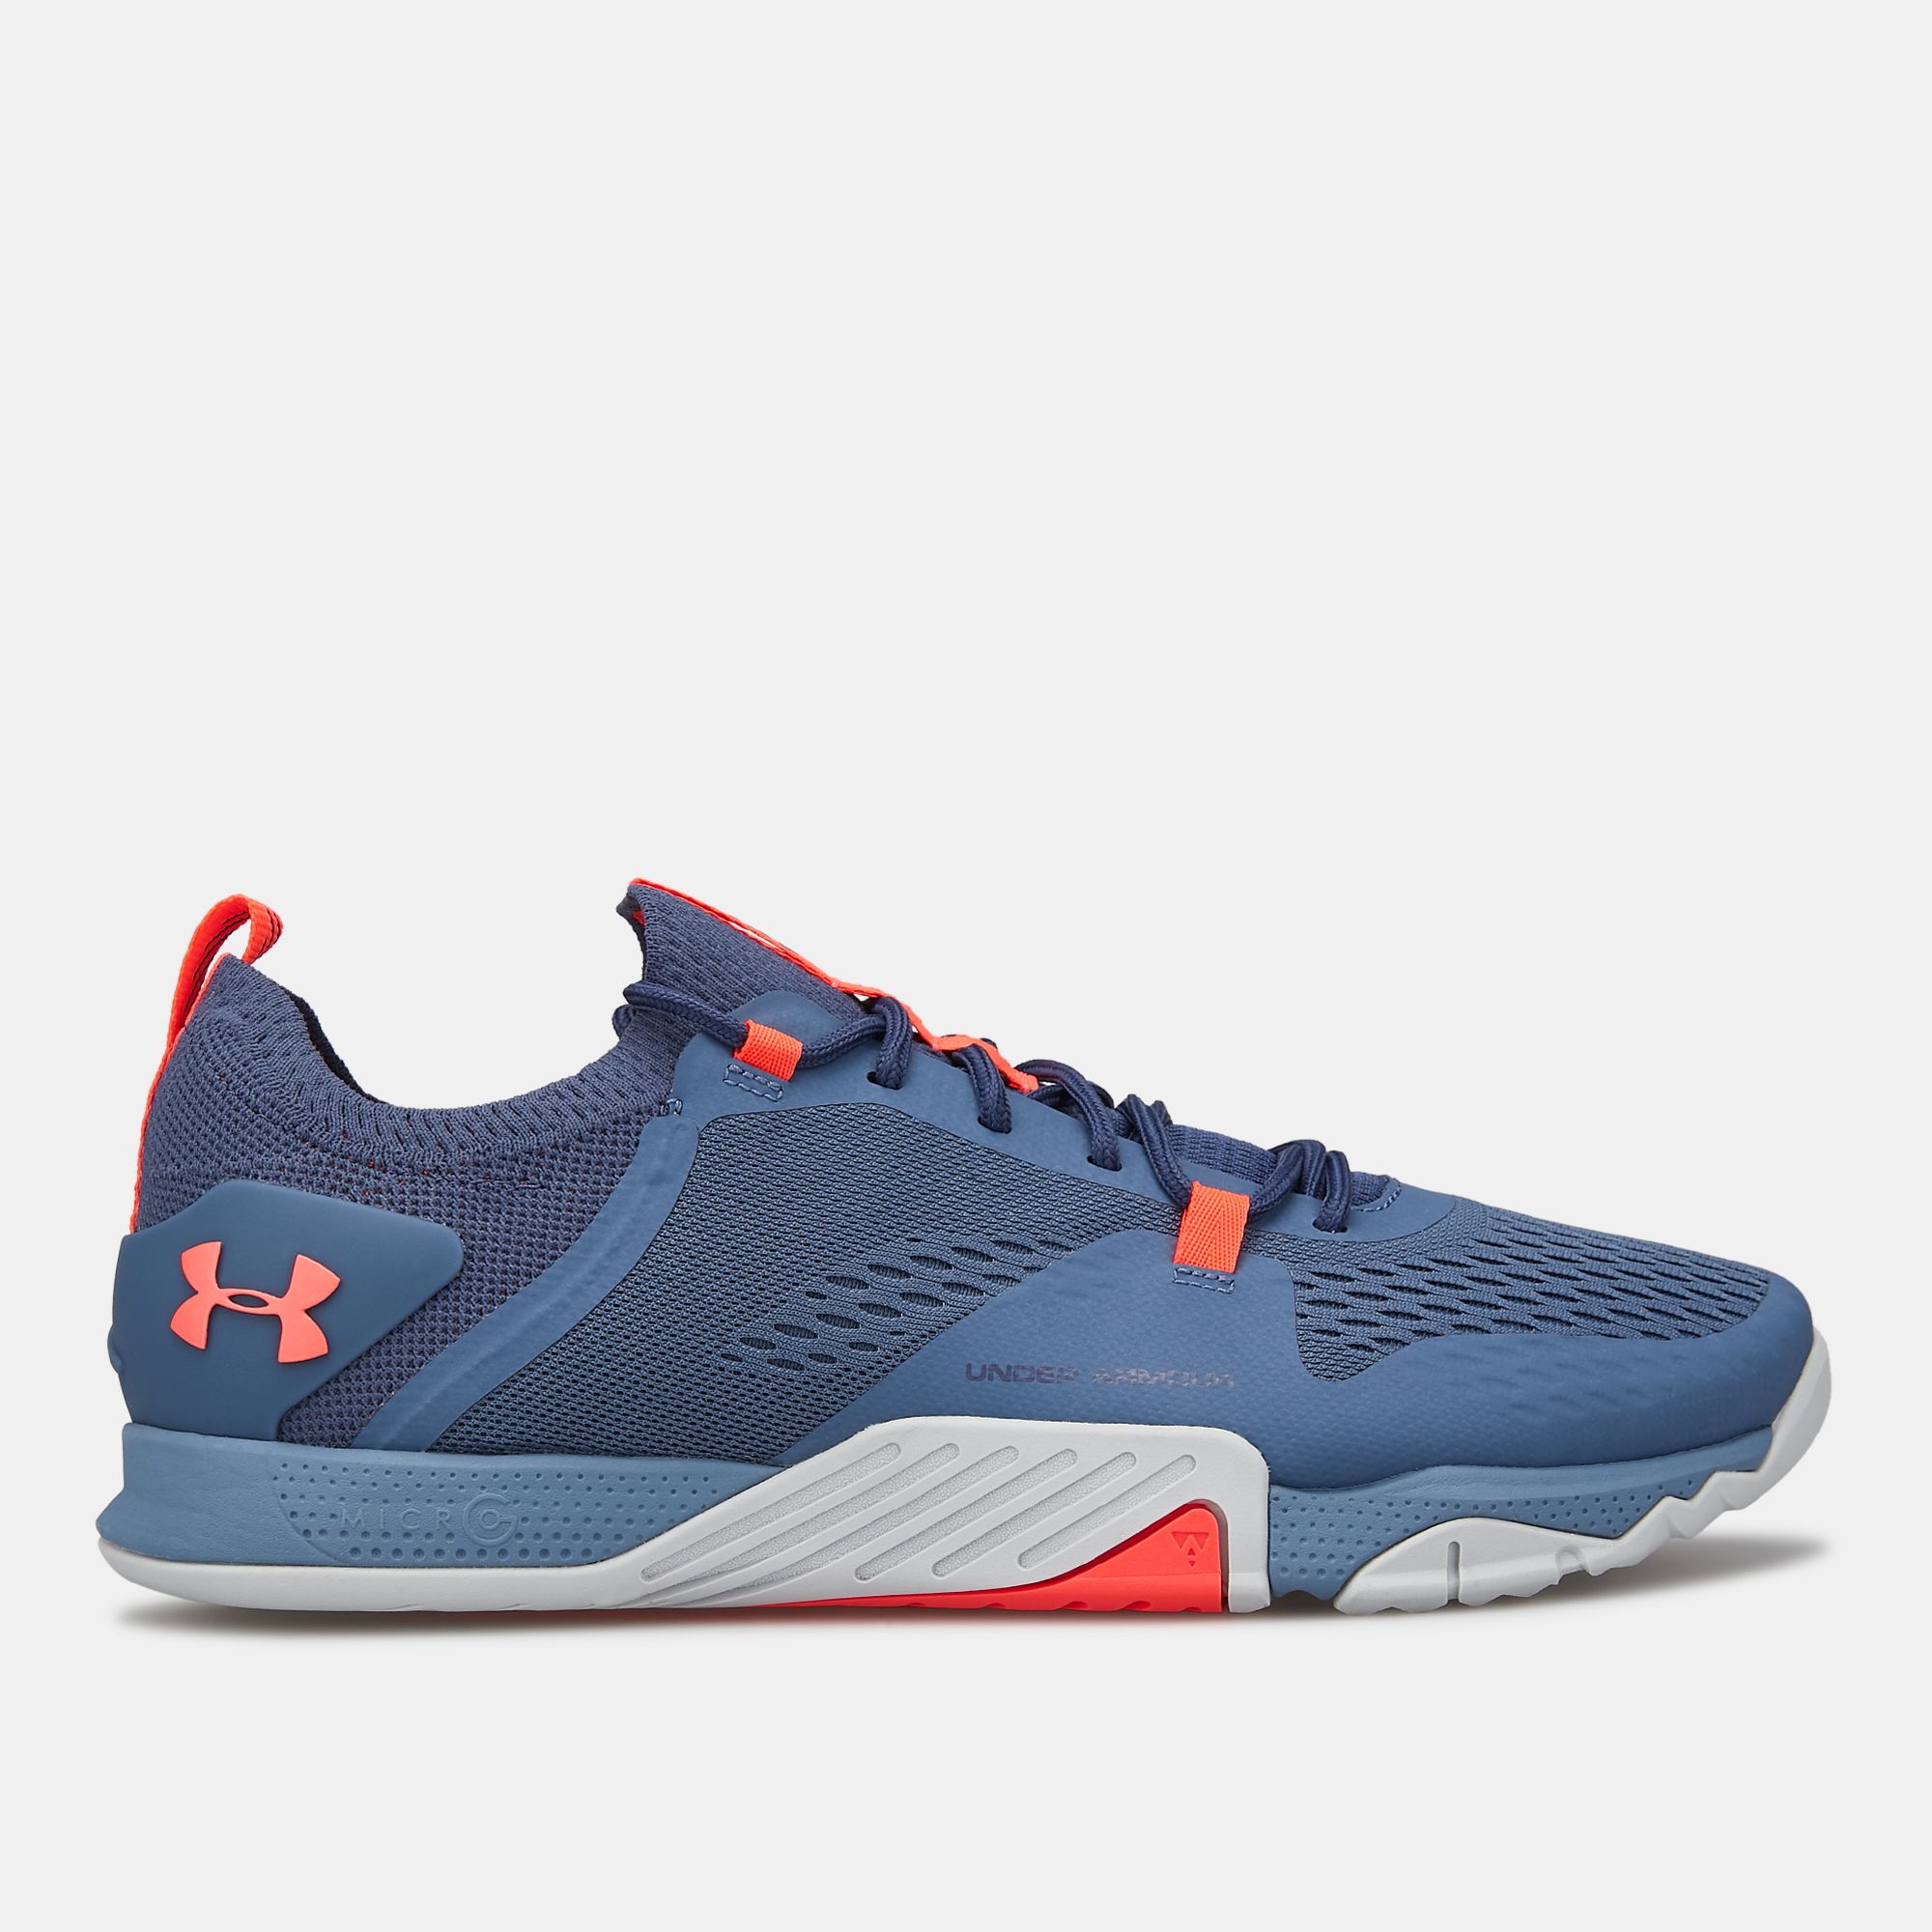 tribase reign under armour